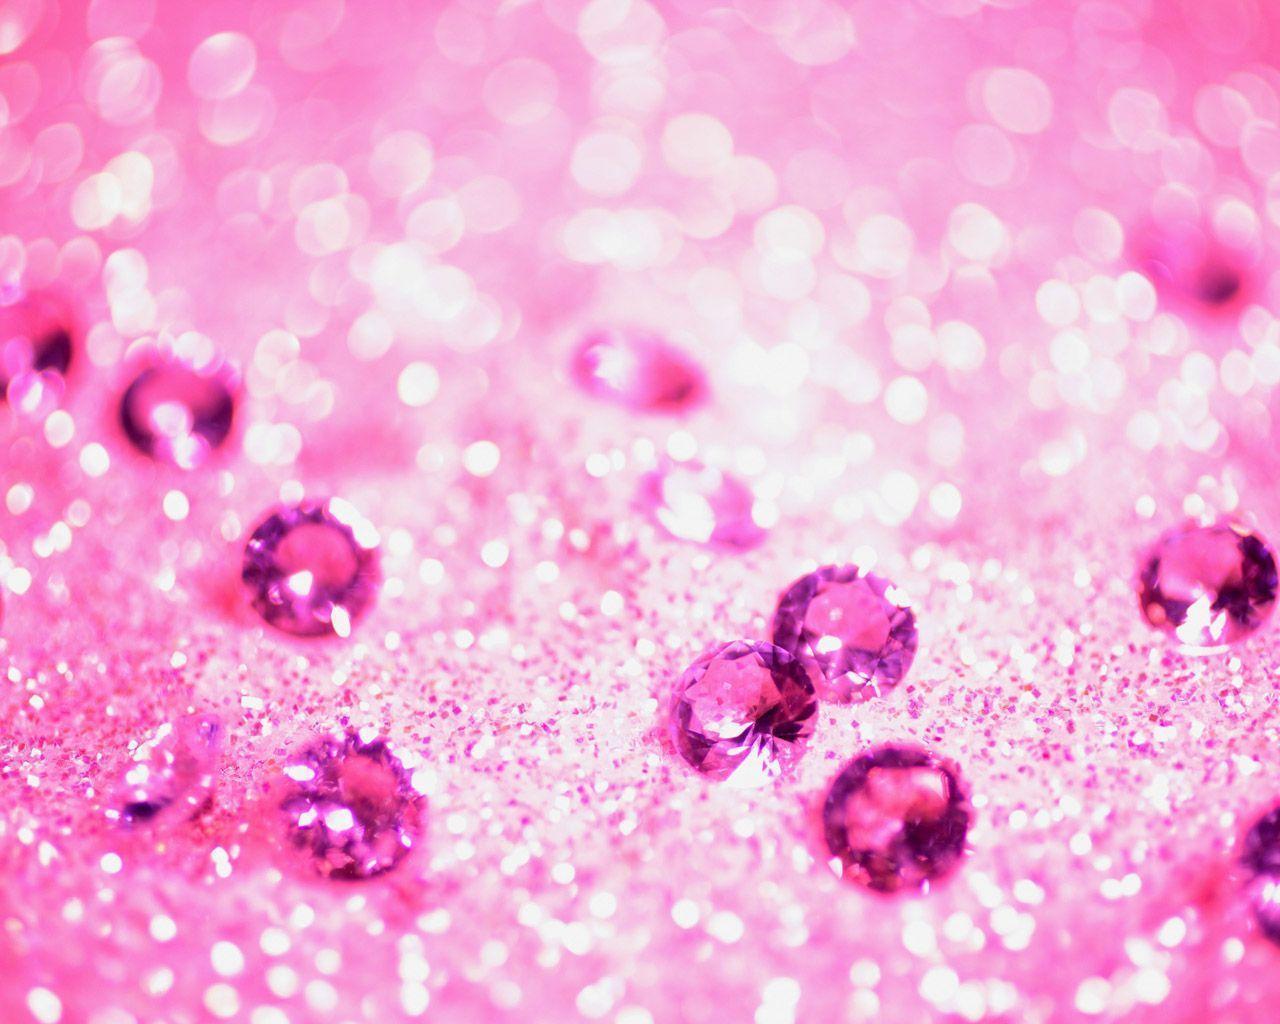 pink wallpaper free download Search Engine